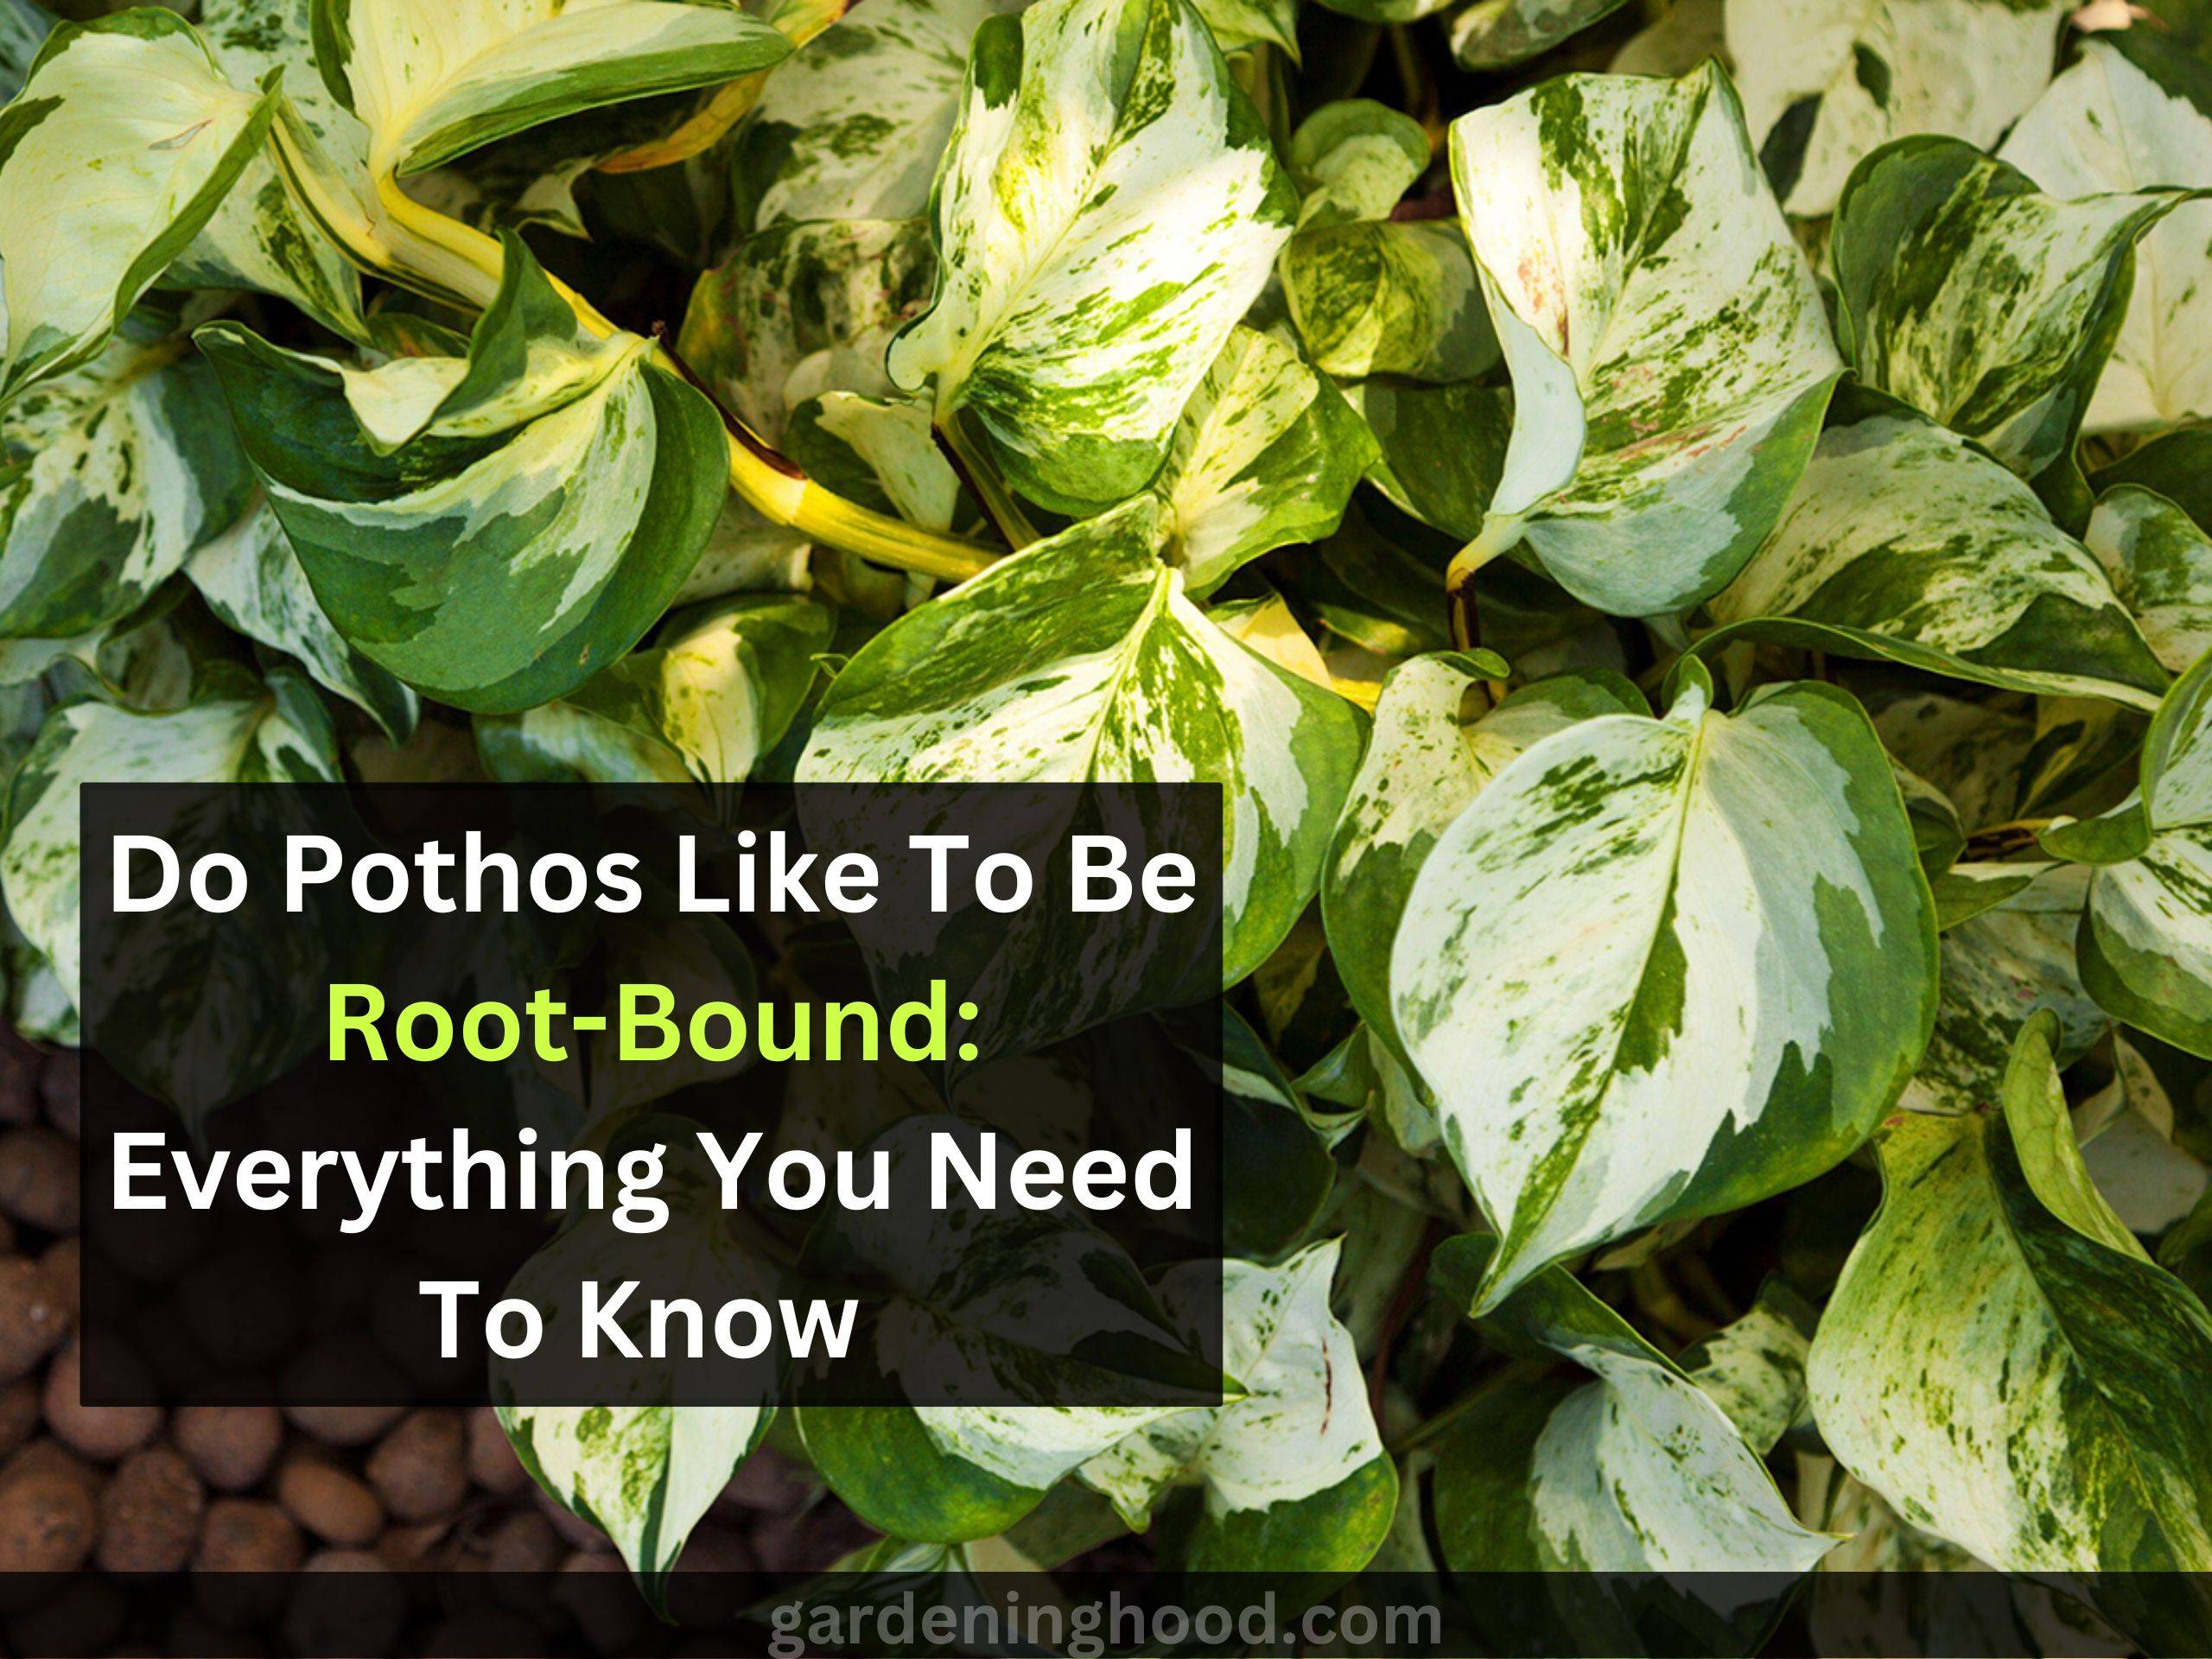 Do Pothos Like To Be Root-Bound: Everything You Need To Know